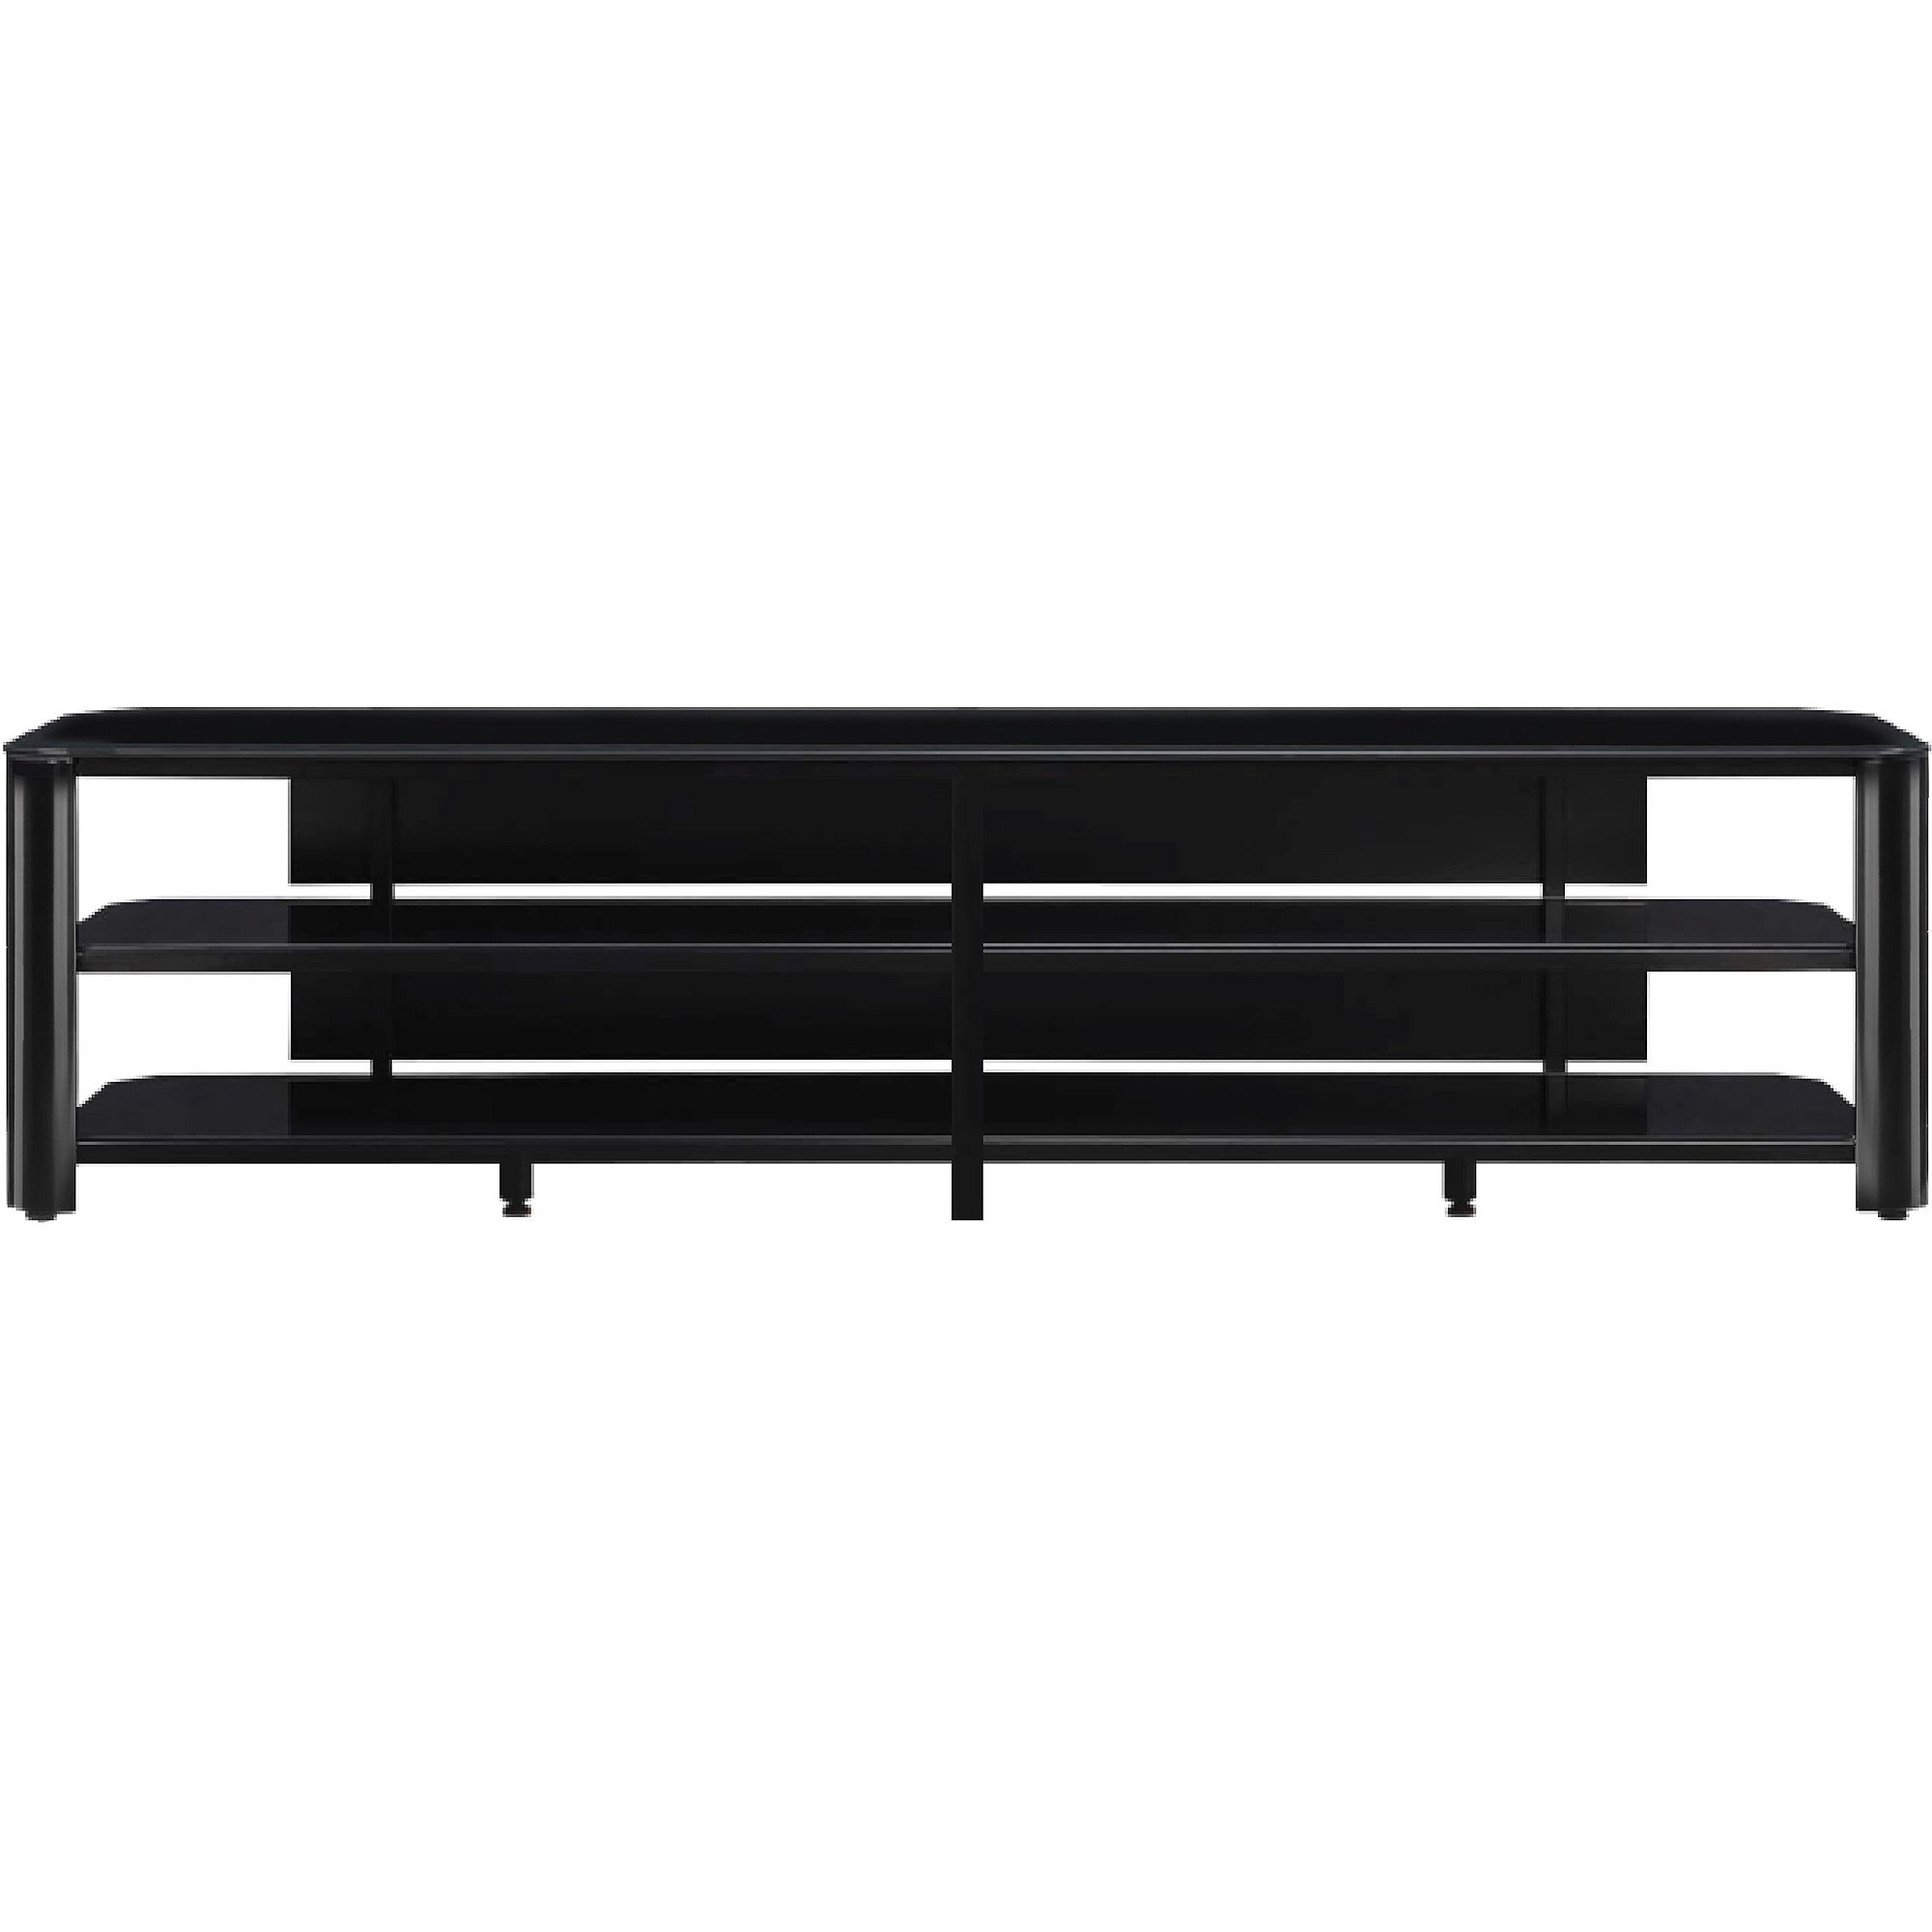 Innovex Oxford Glass Black Tv Stand For Tvs Up To 83" – Walmart Intended For Oxford 84 Inch Tv Stands (View 17 of 20)